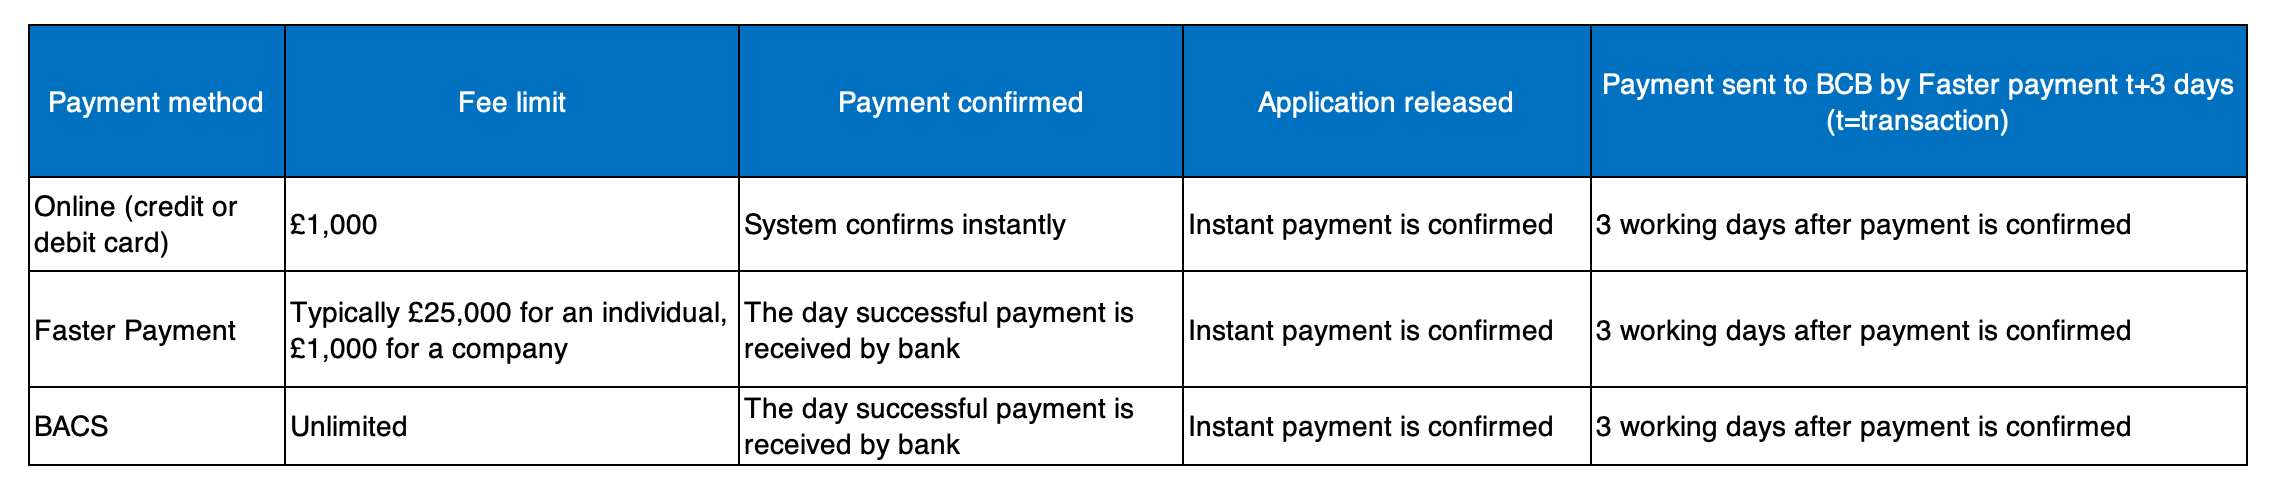 table showing the elapsed time of payment